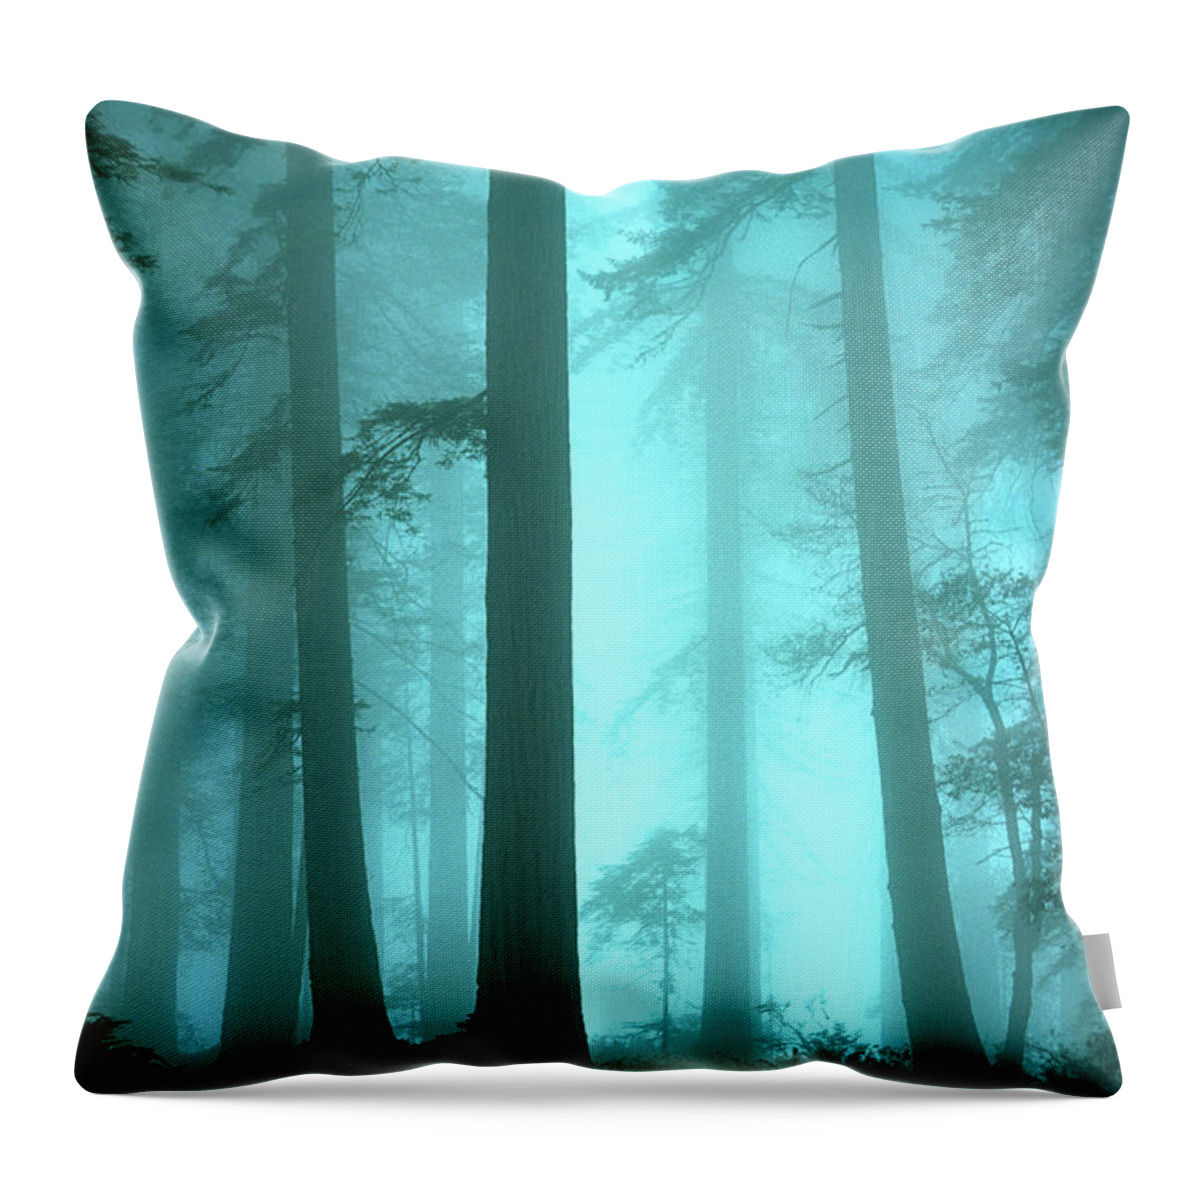 Redwoods Throw Pillow featuring the photograph A Place Of Awe by Bob Christopher